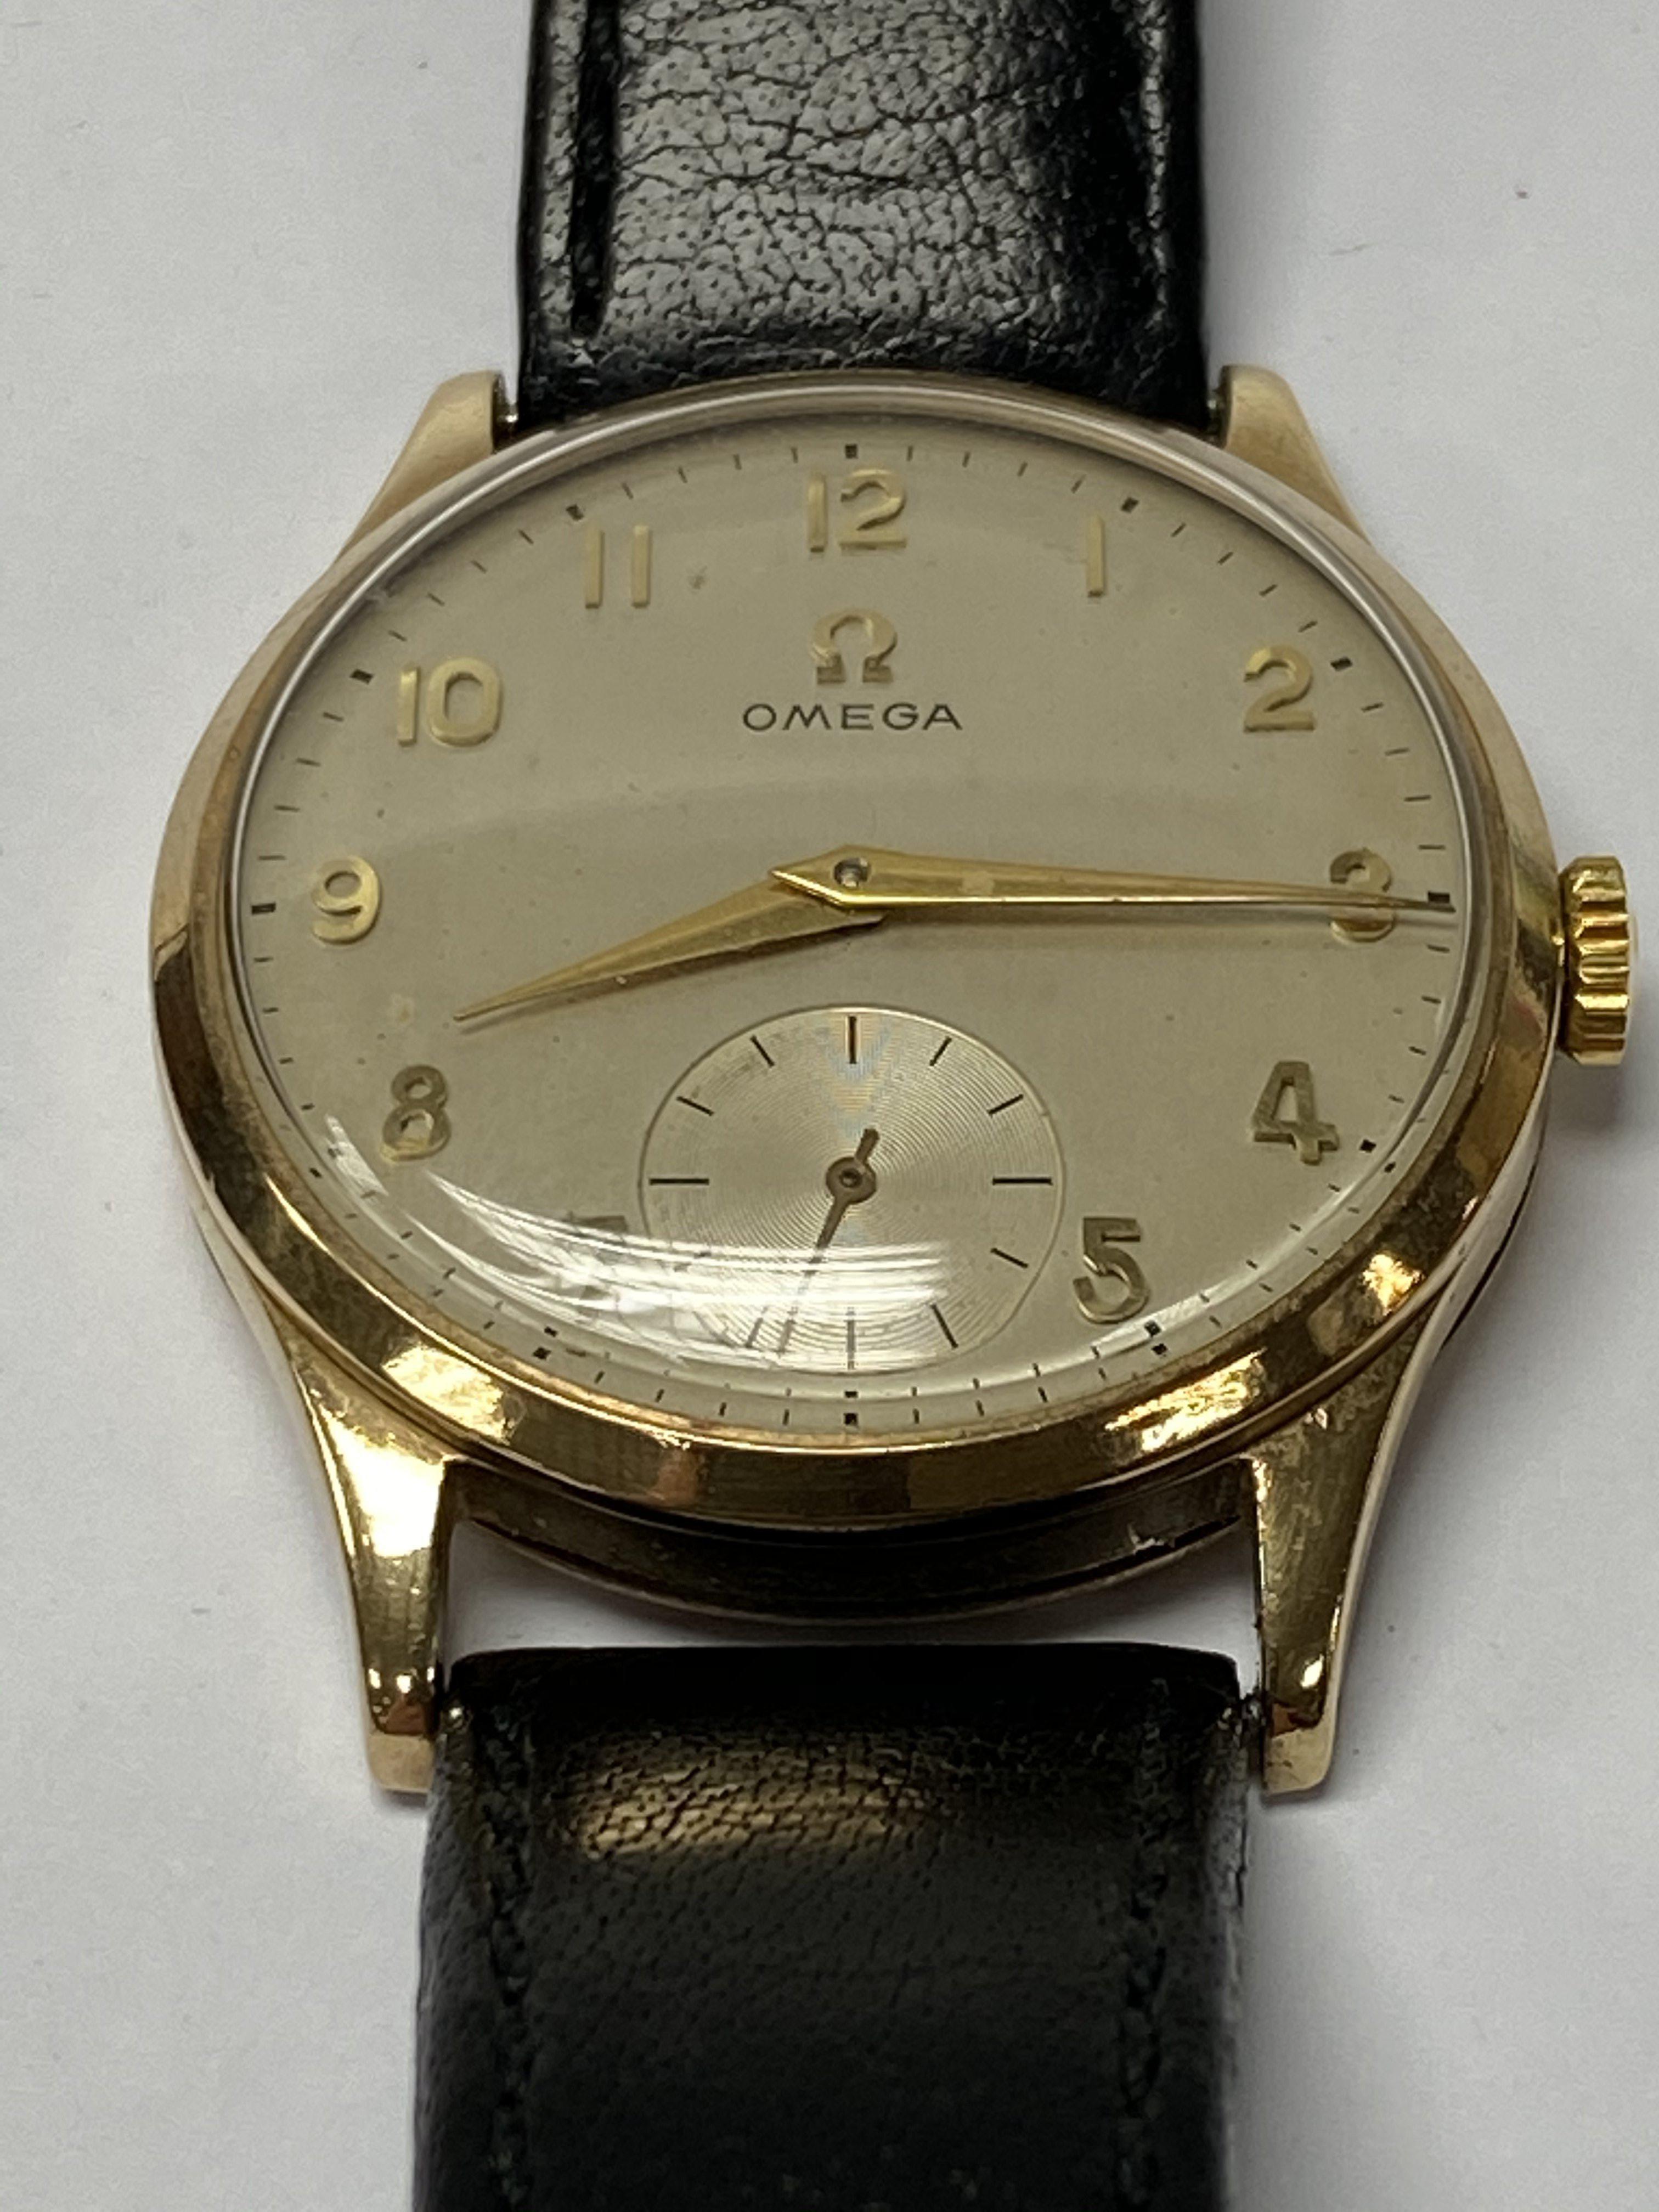 A gents 9ct gold cased Omega wristwatch, engraving